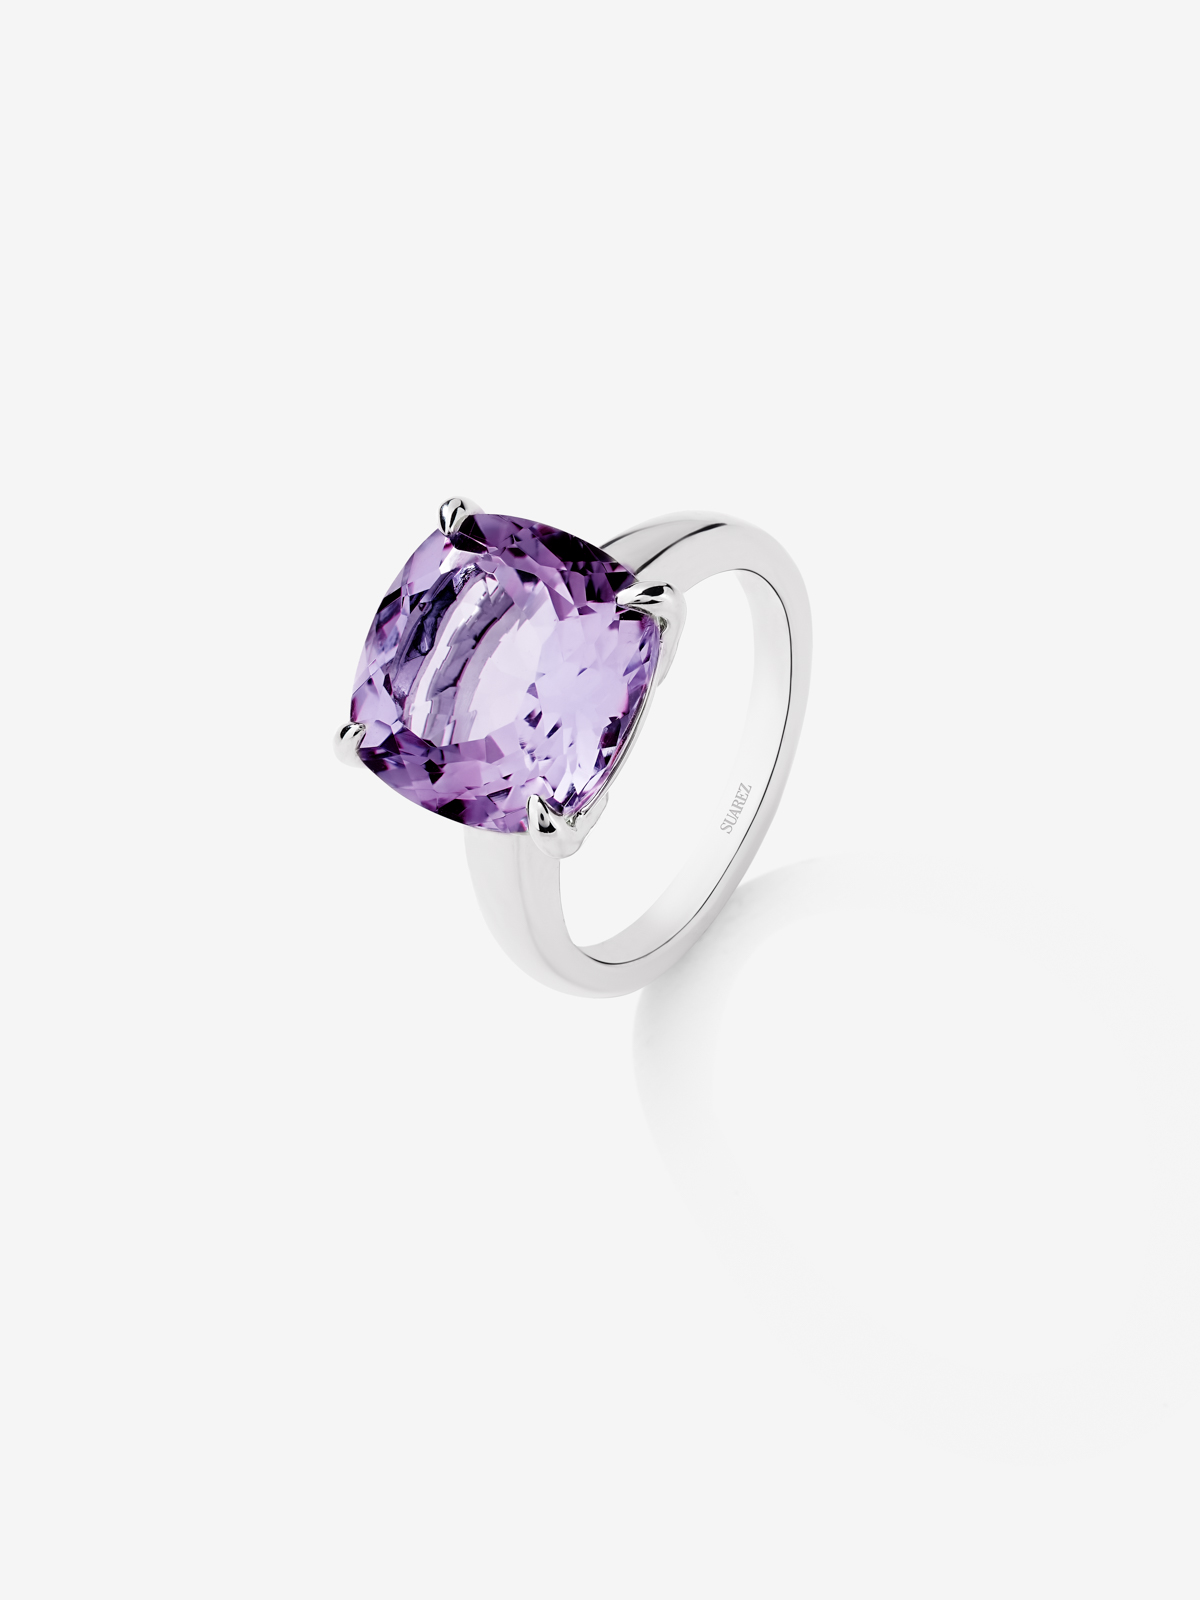 Silver ring with purple amethyst